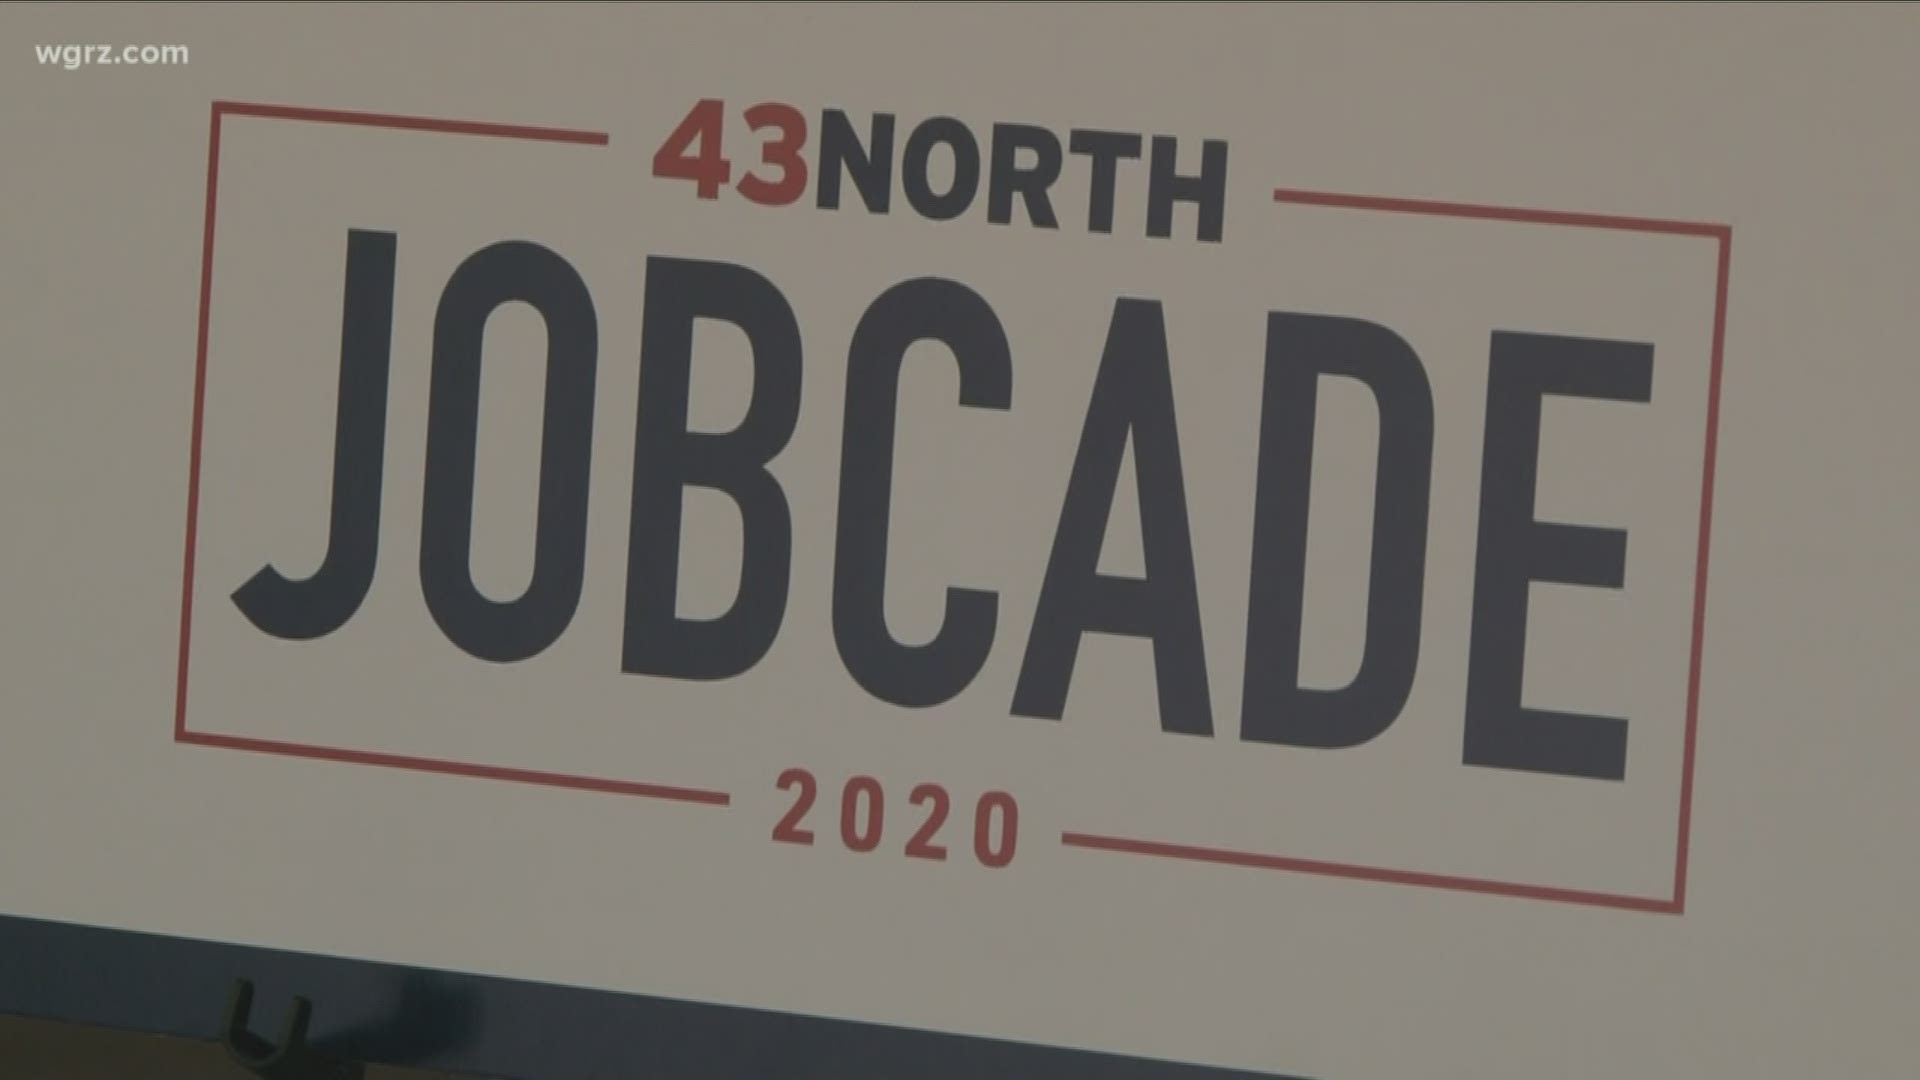 43 North held a job fair Wednesday and is also launching a new online platform to help connect applicants directly with employers.